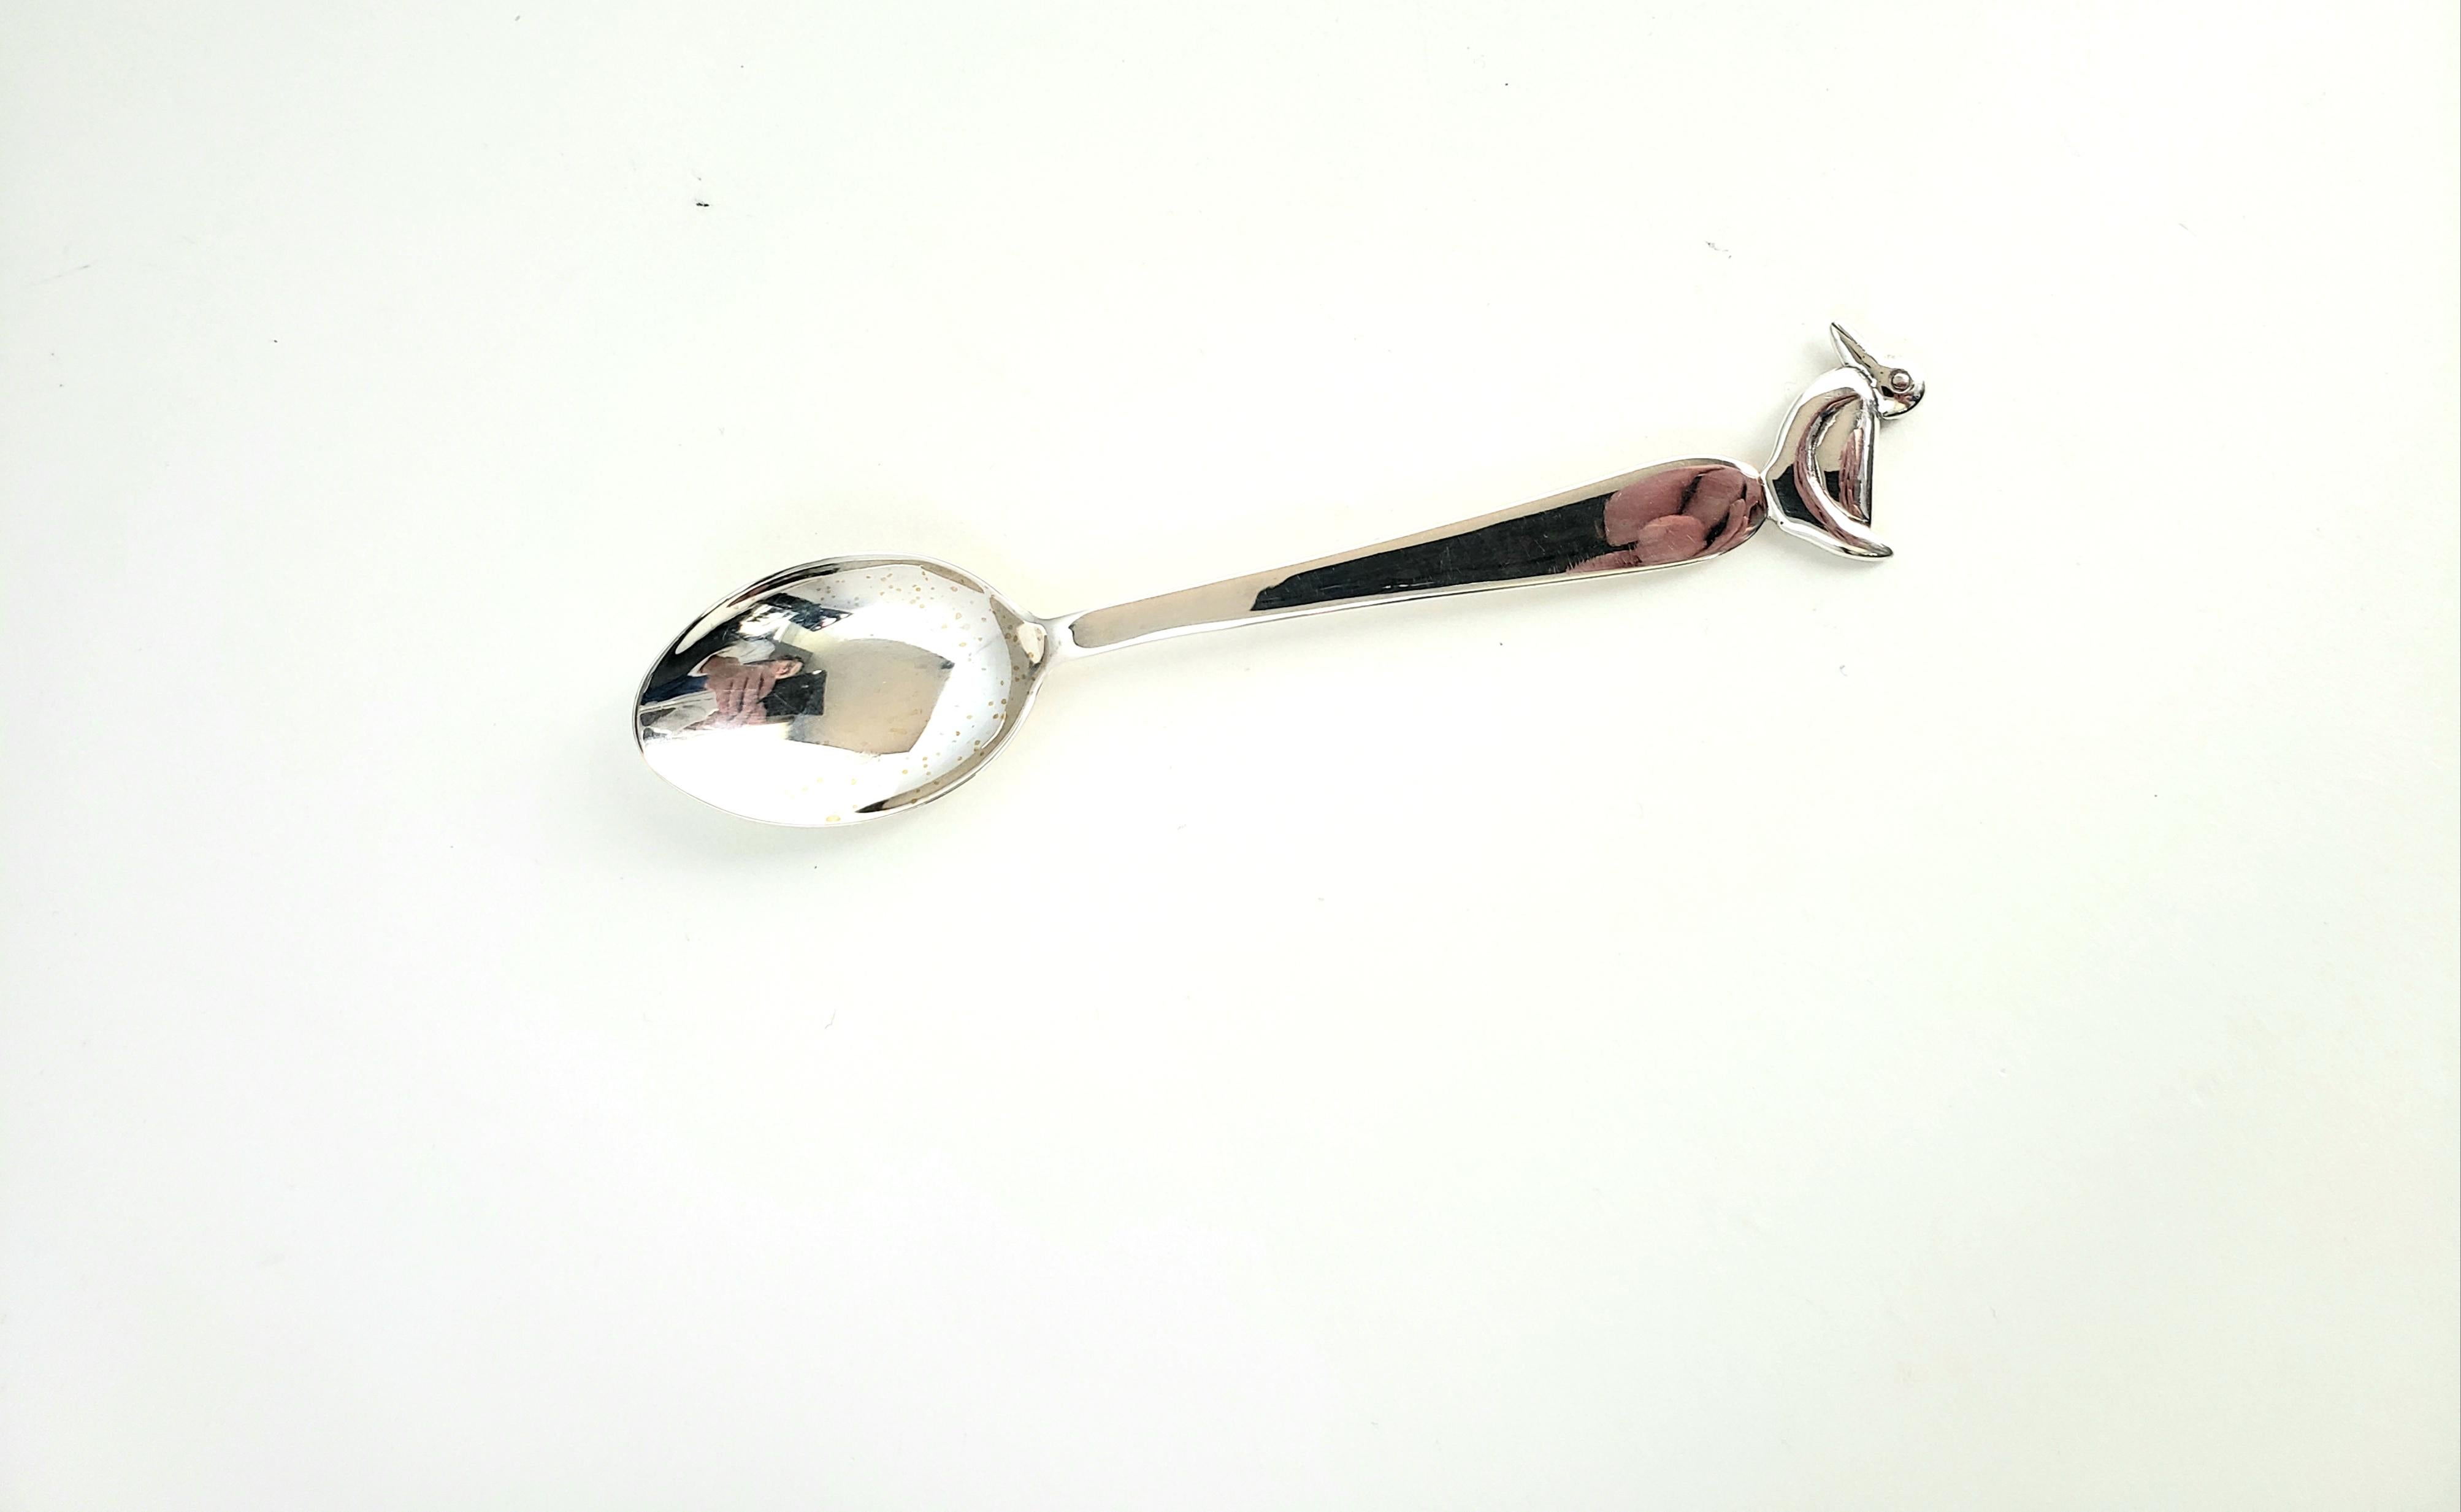 Sterling Duck Baby Spoon

A cute little duck at the end of the spoon adds a touch of fun to the silver spoon. Crafted entirely in sterling silver, this spoon will become a baby's treasure. 

Measurements:  5 and 1/2 inches long.

Weight: 25.0 g /